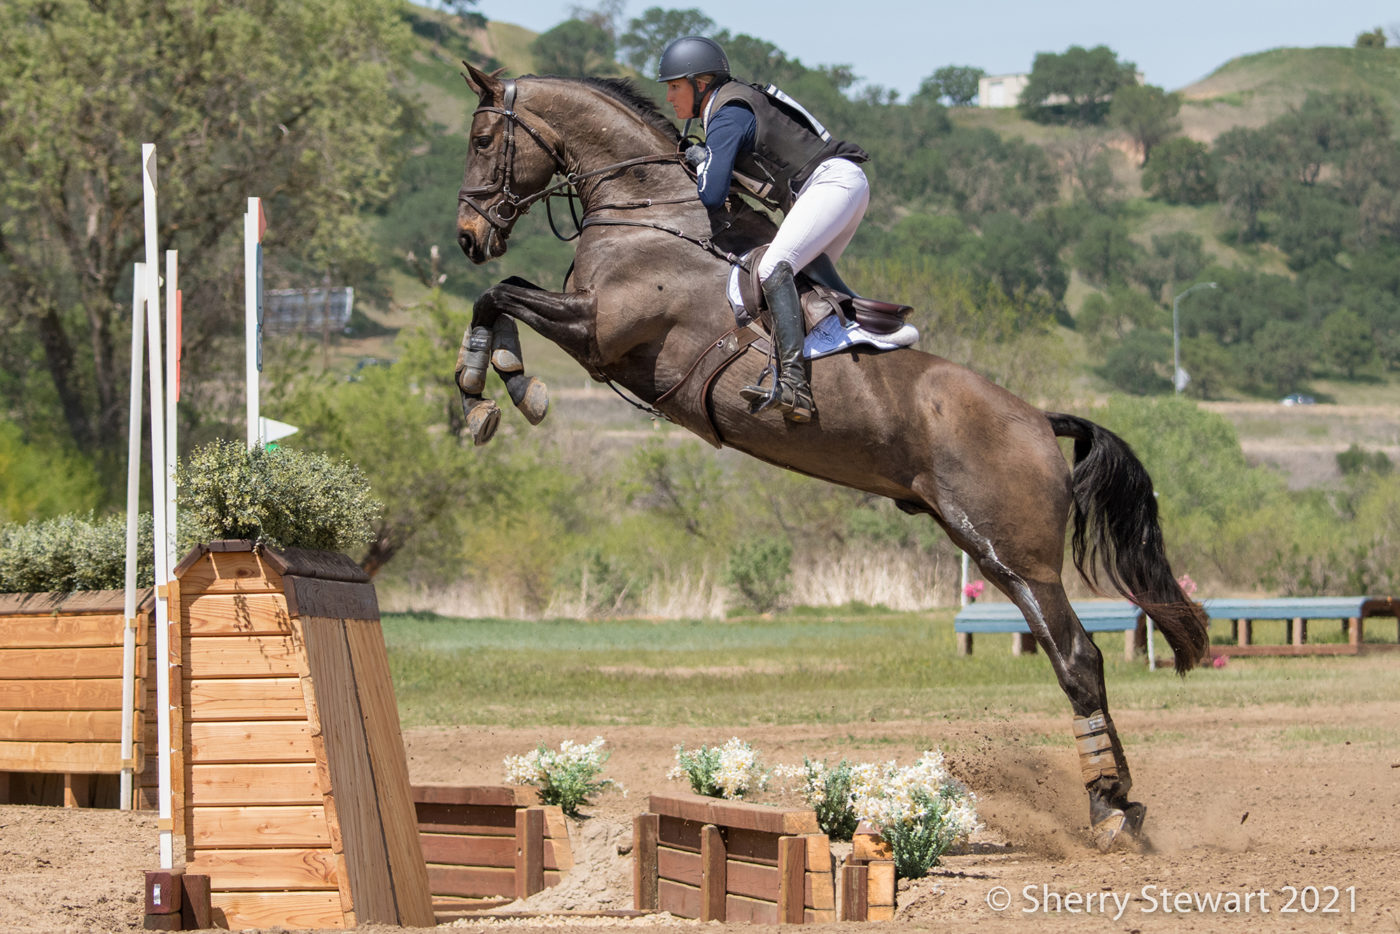 CCI4*-L - 3rd - Bec Braitling and Caravaggio. Sherry Stewart Photo.